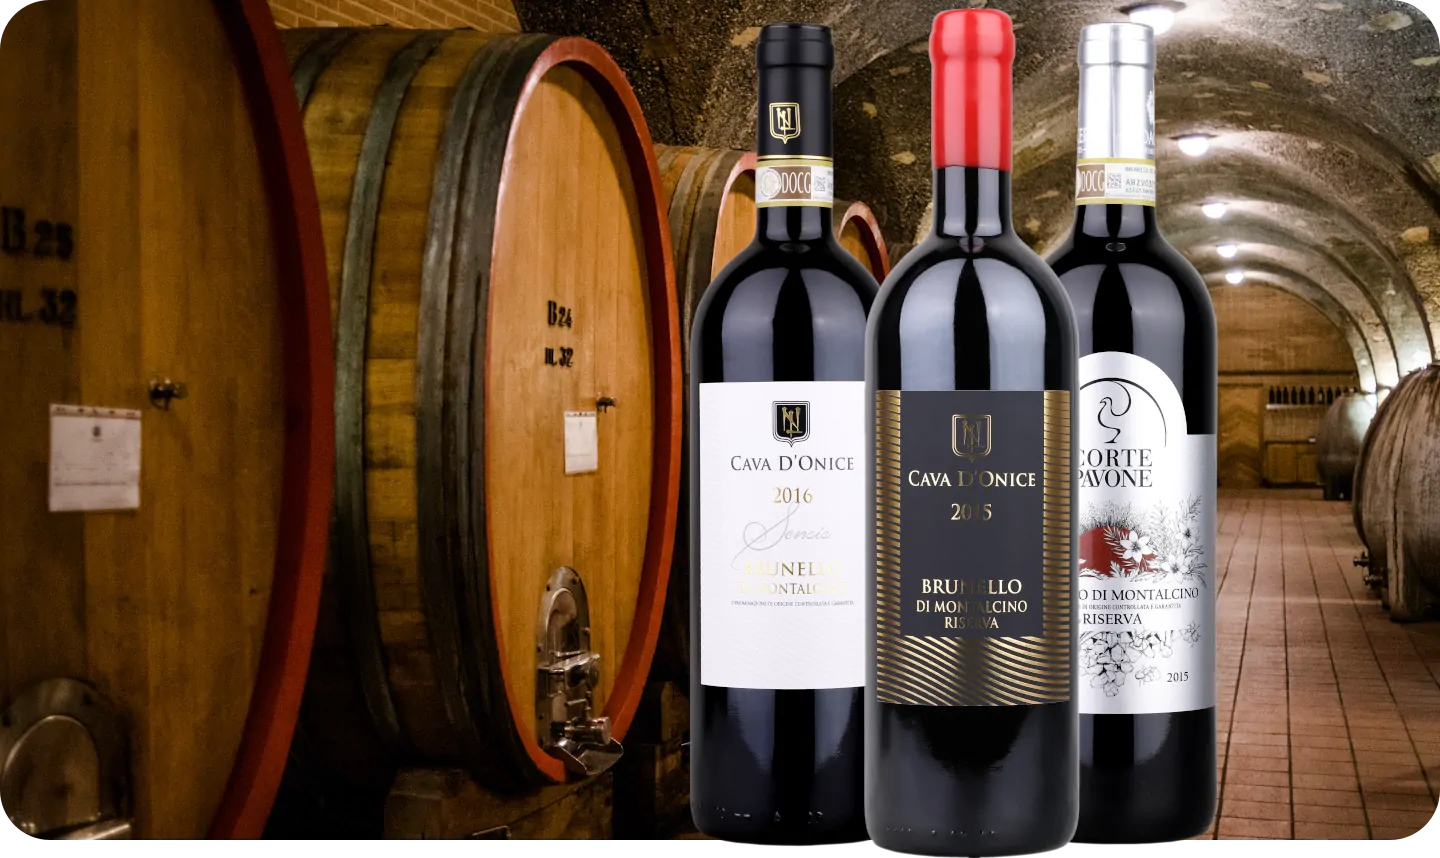 Collection of Brunello di Montalcino DOCG wines by Independent Wine